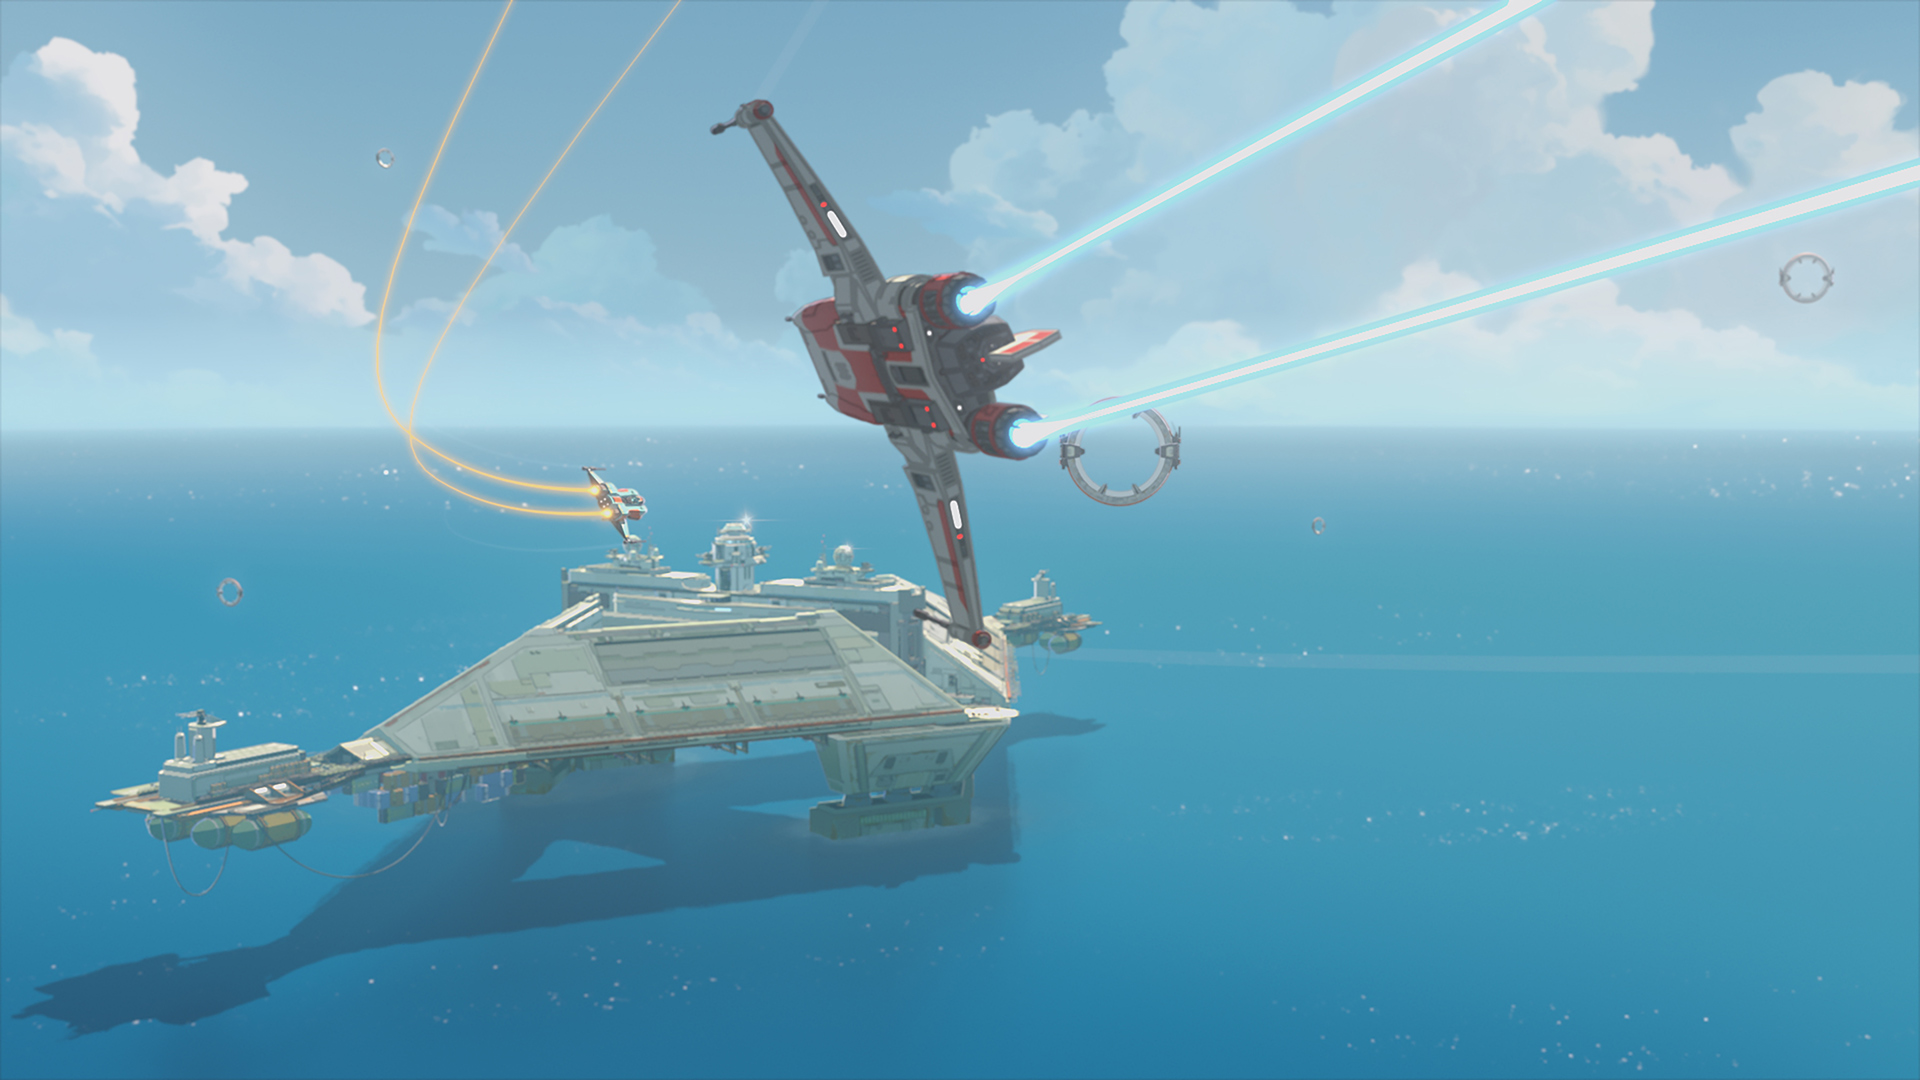 Ships fly over the Colossus